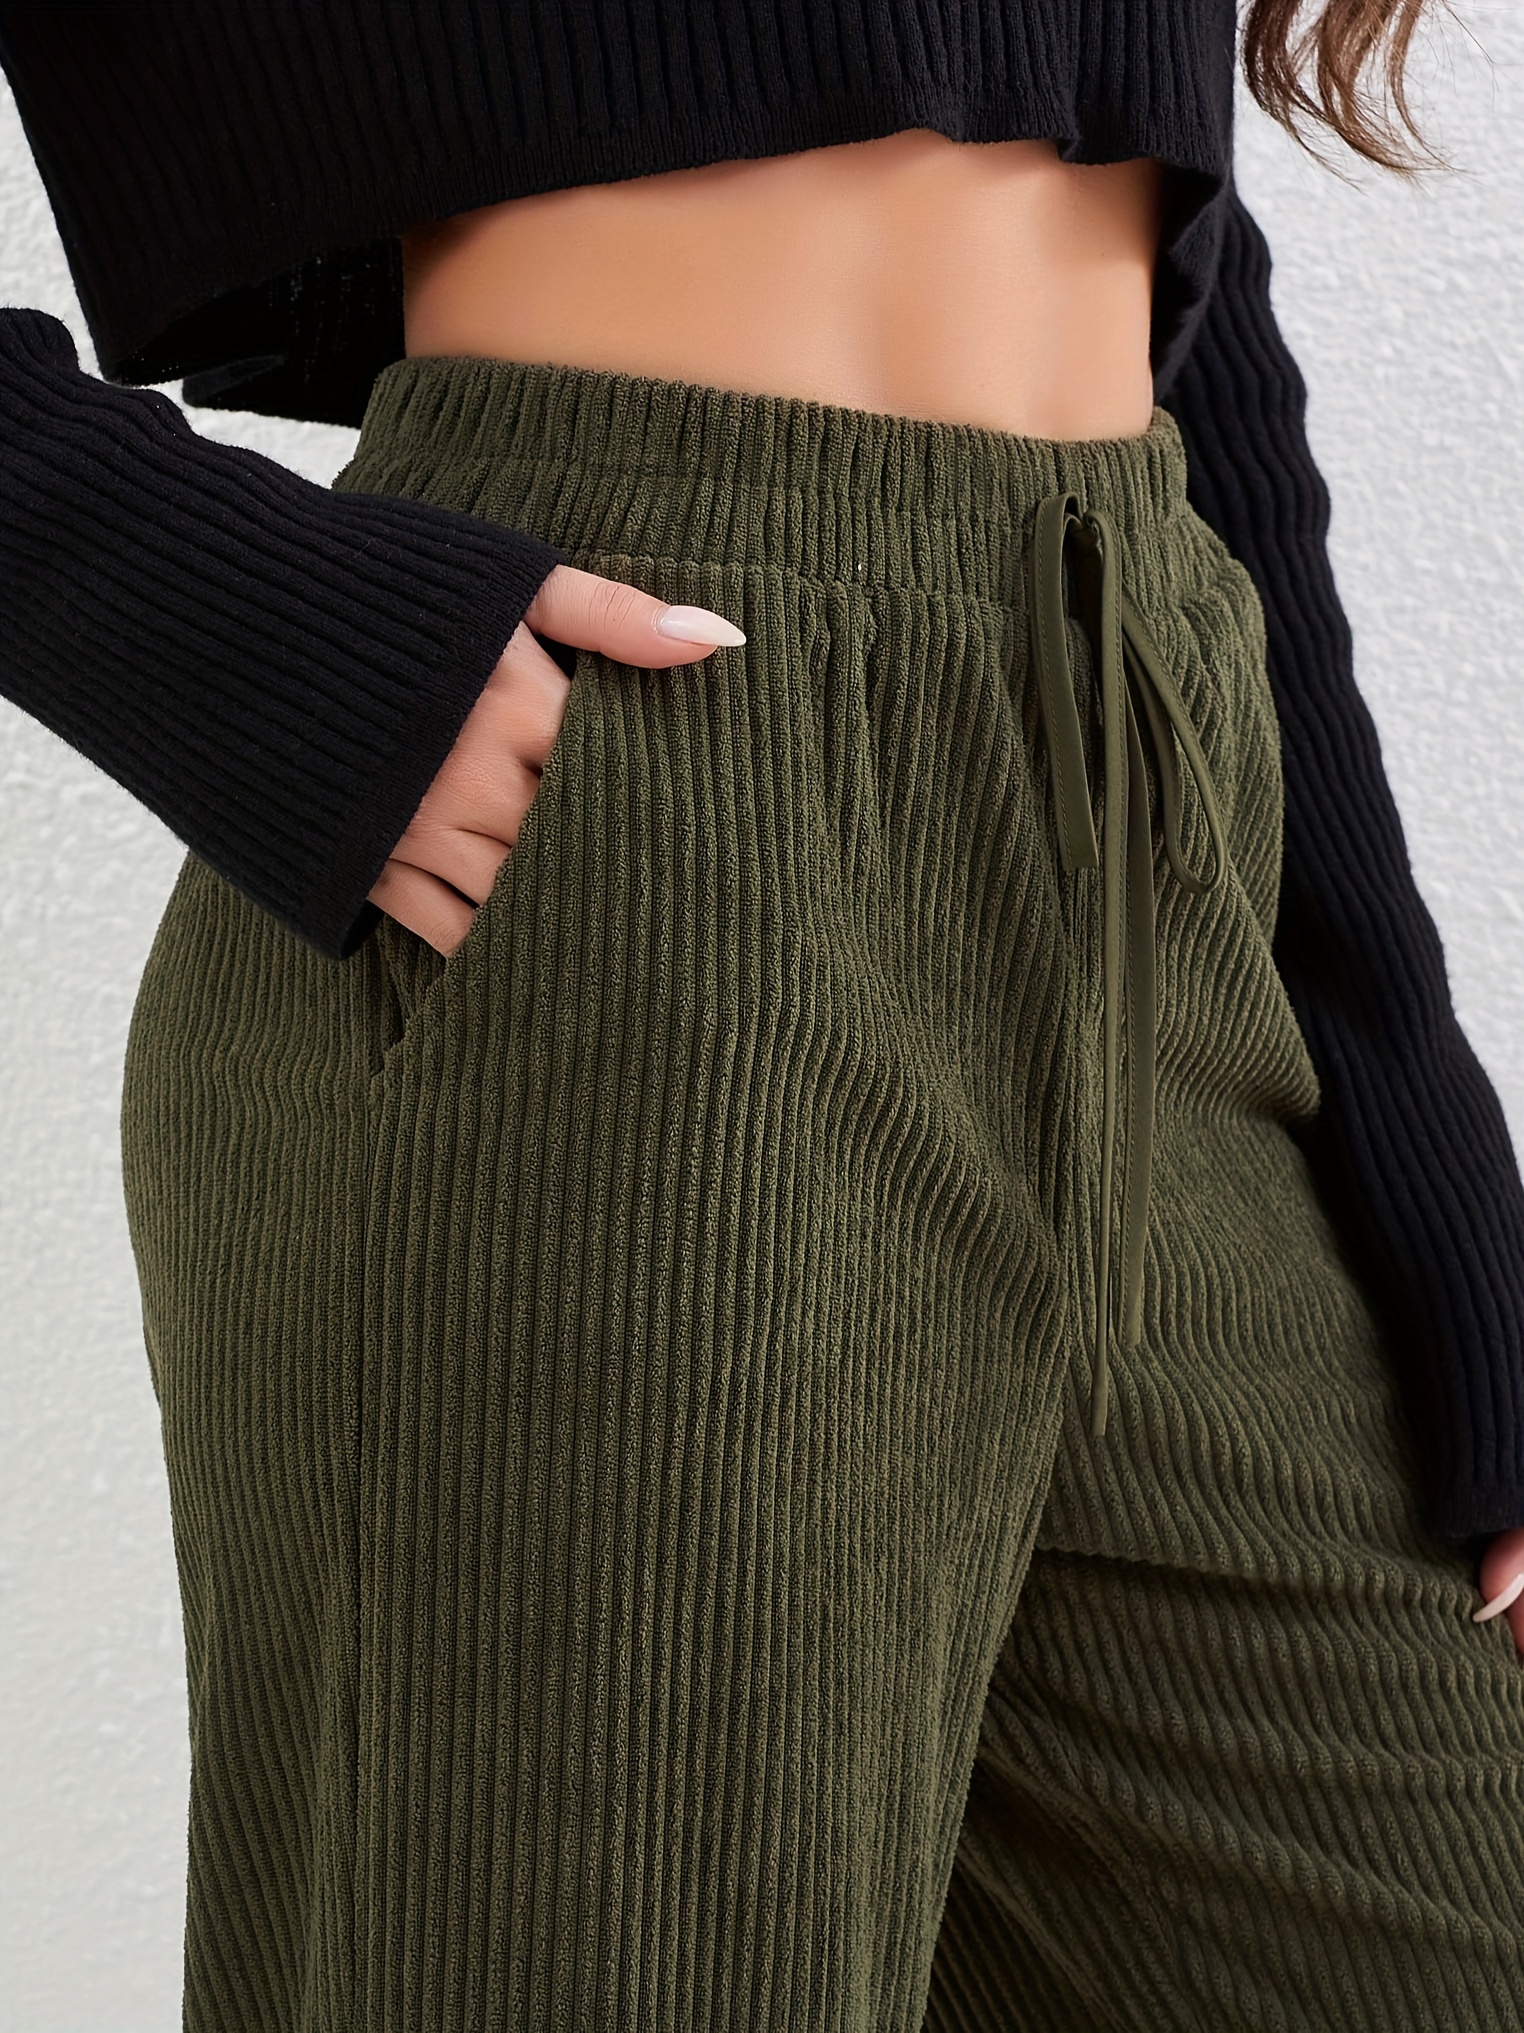 solid corduroy straight leg pants casual high waist loose pants with pocket womens clothing details 4